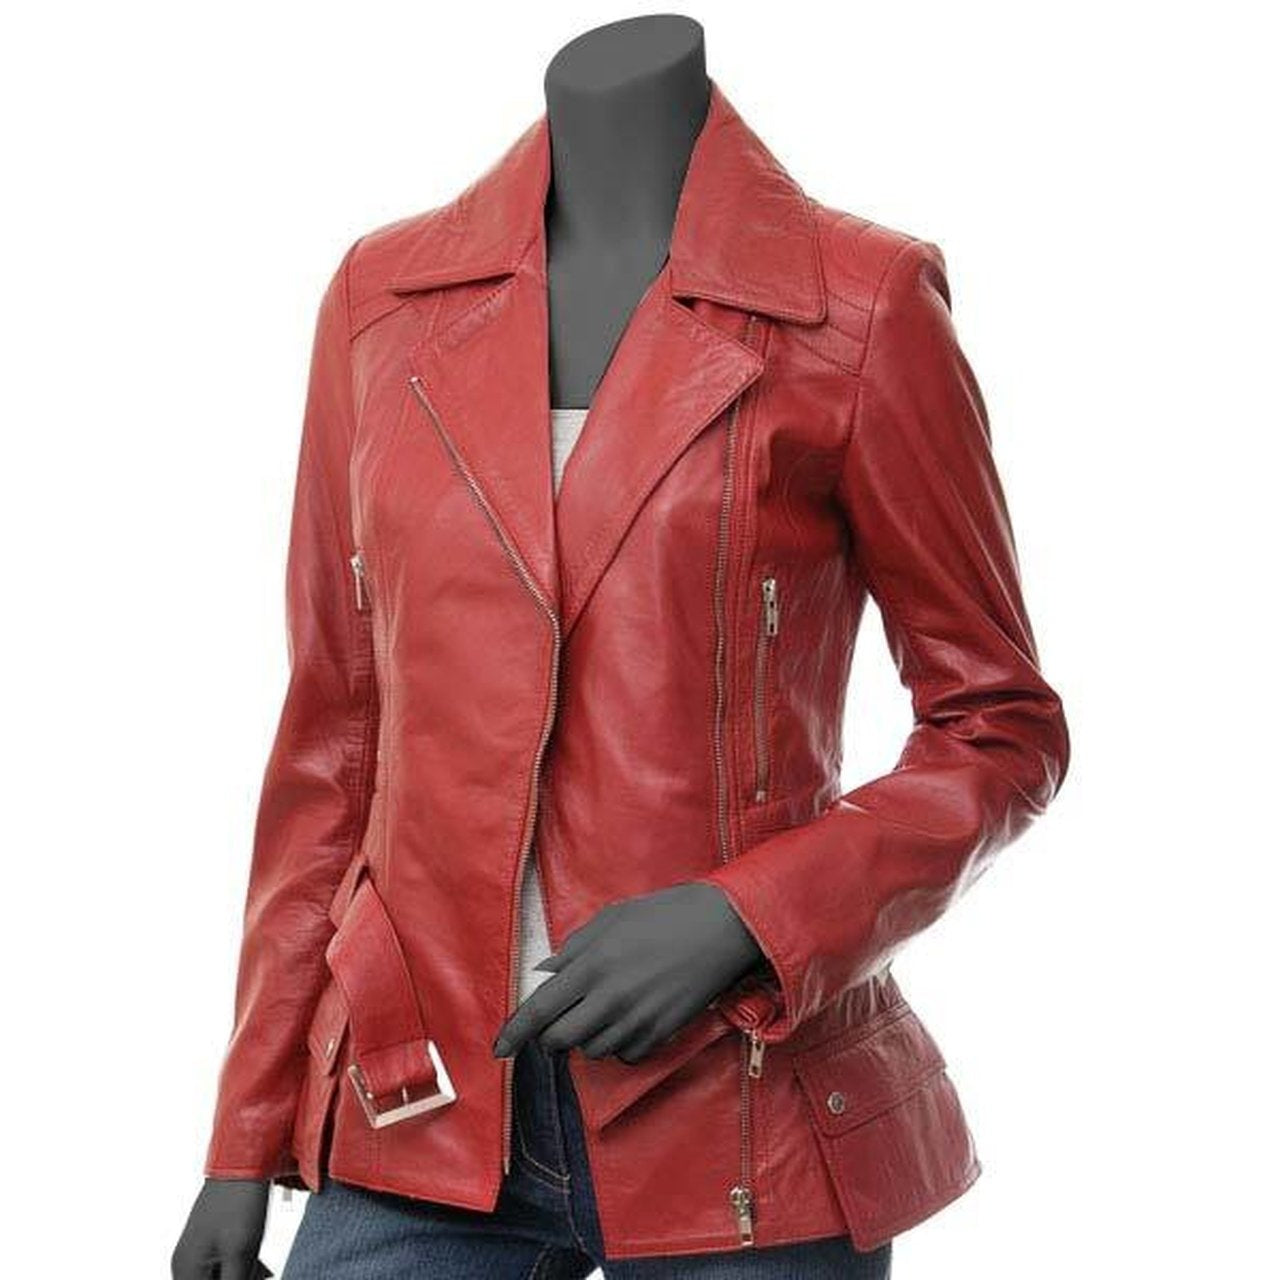 Stylish Red Leather Jacket for Women - Women Leather Jacket - Leather Jacket